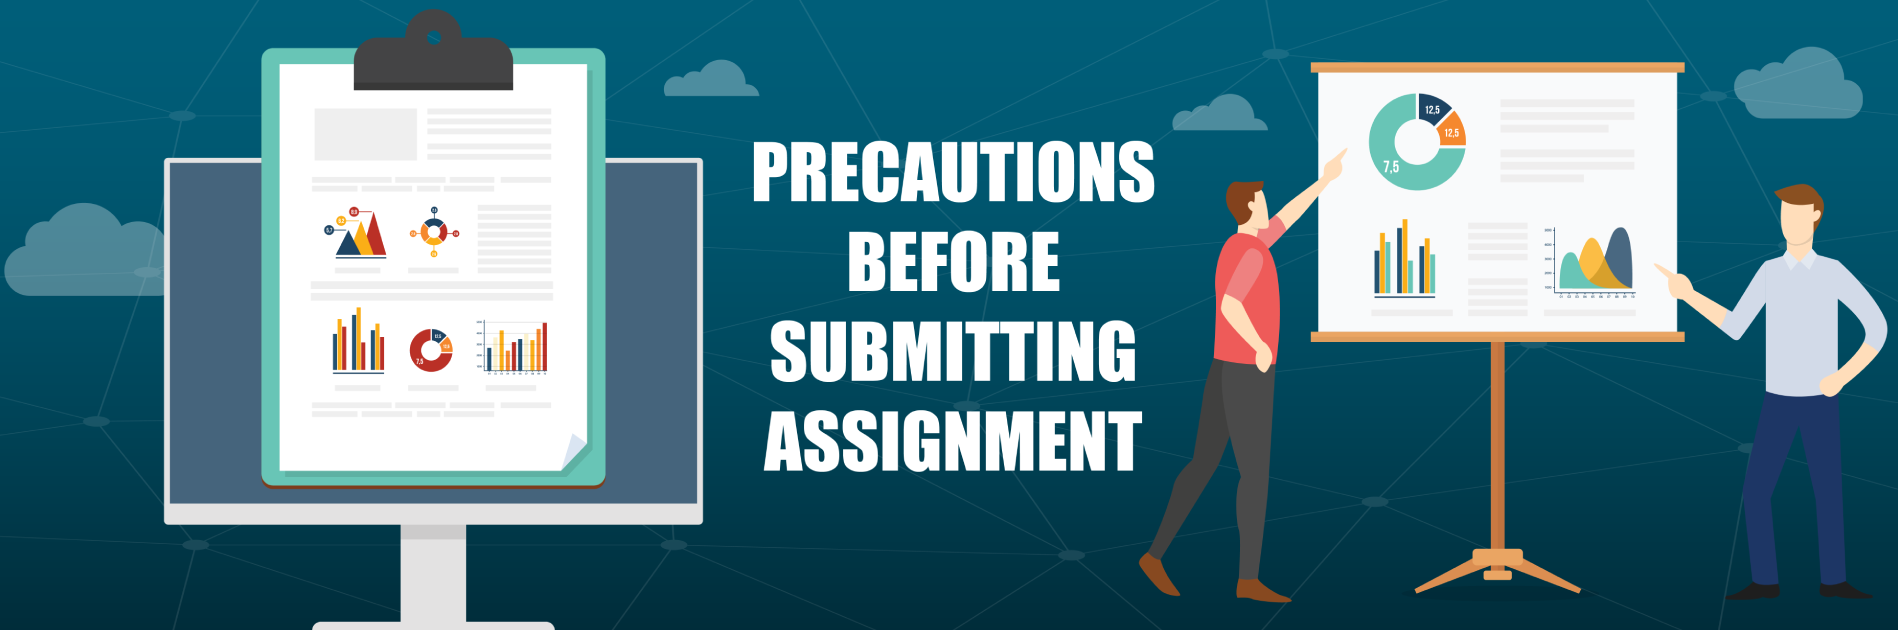 Precautions-to-Take-Before-Submitting-a-Completed-Finance-Assignment-at-Your-University